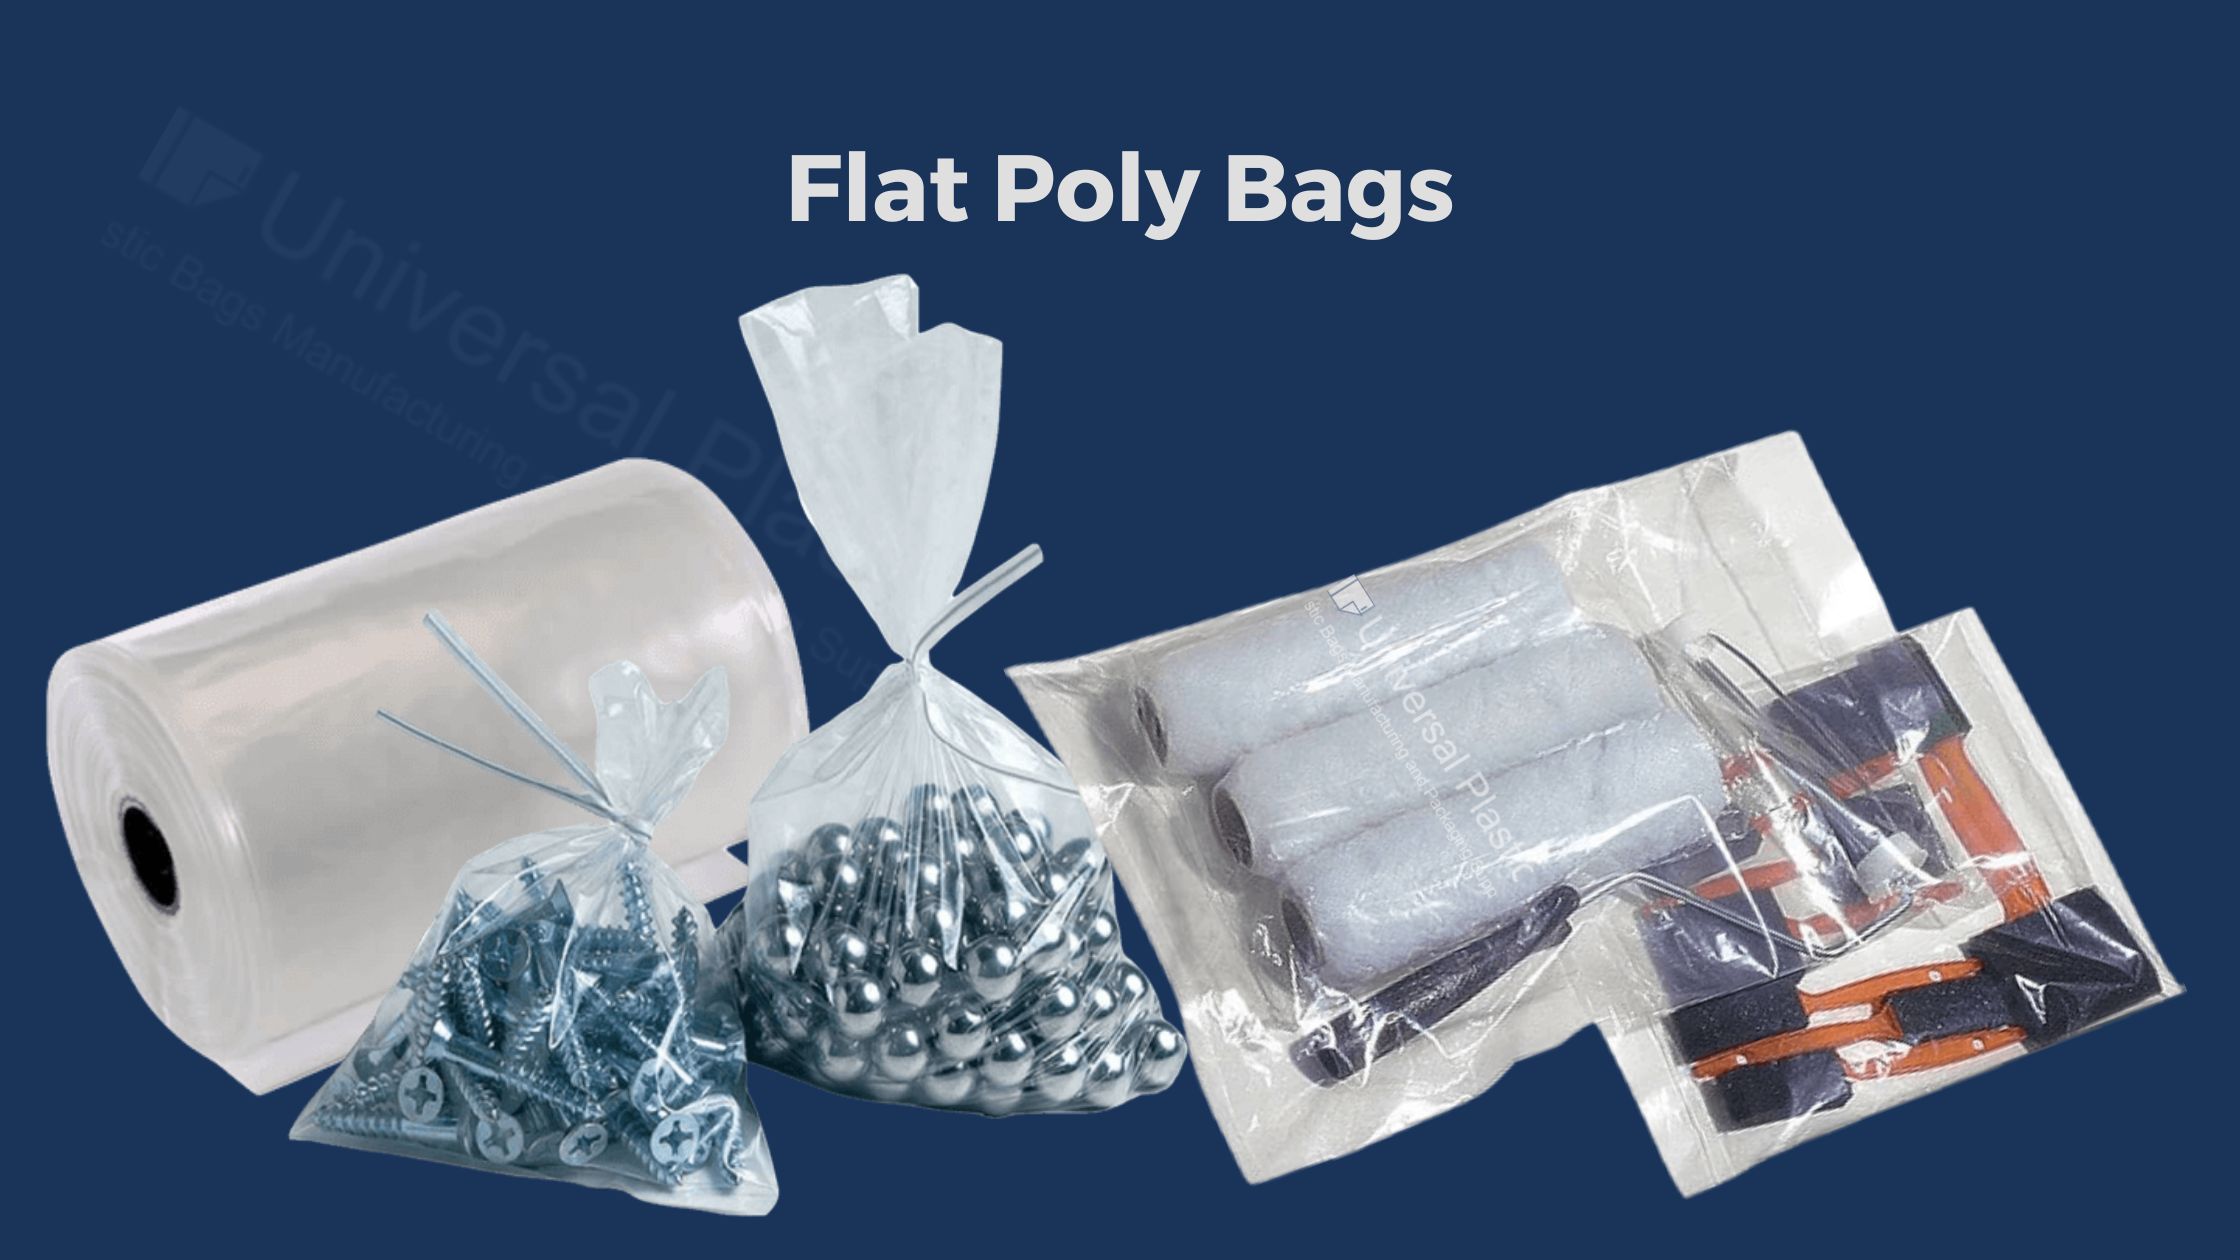 Polybags - Clear Polythene Bags In Many Sizes and 3 Strengths